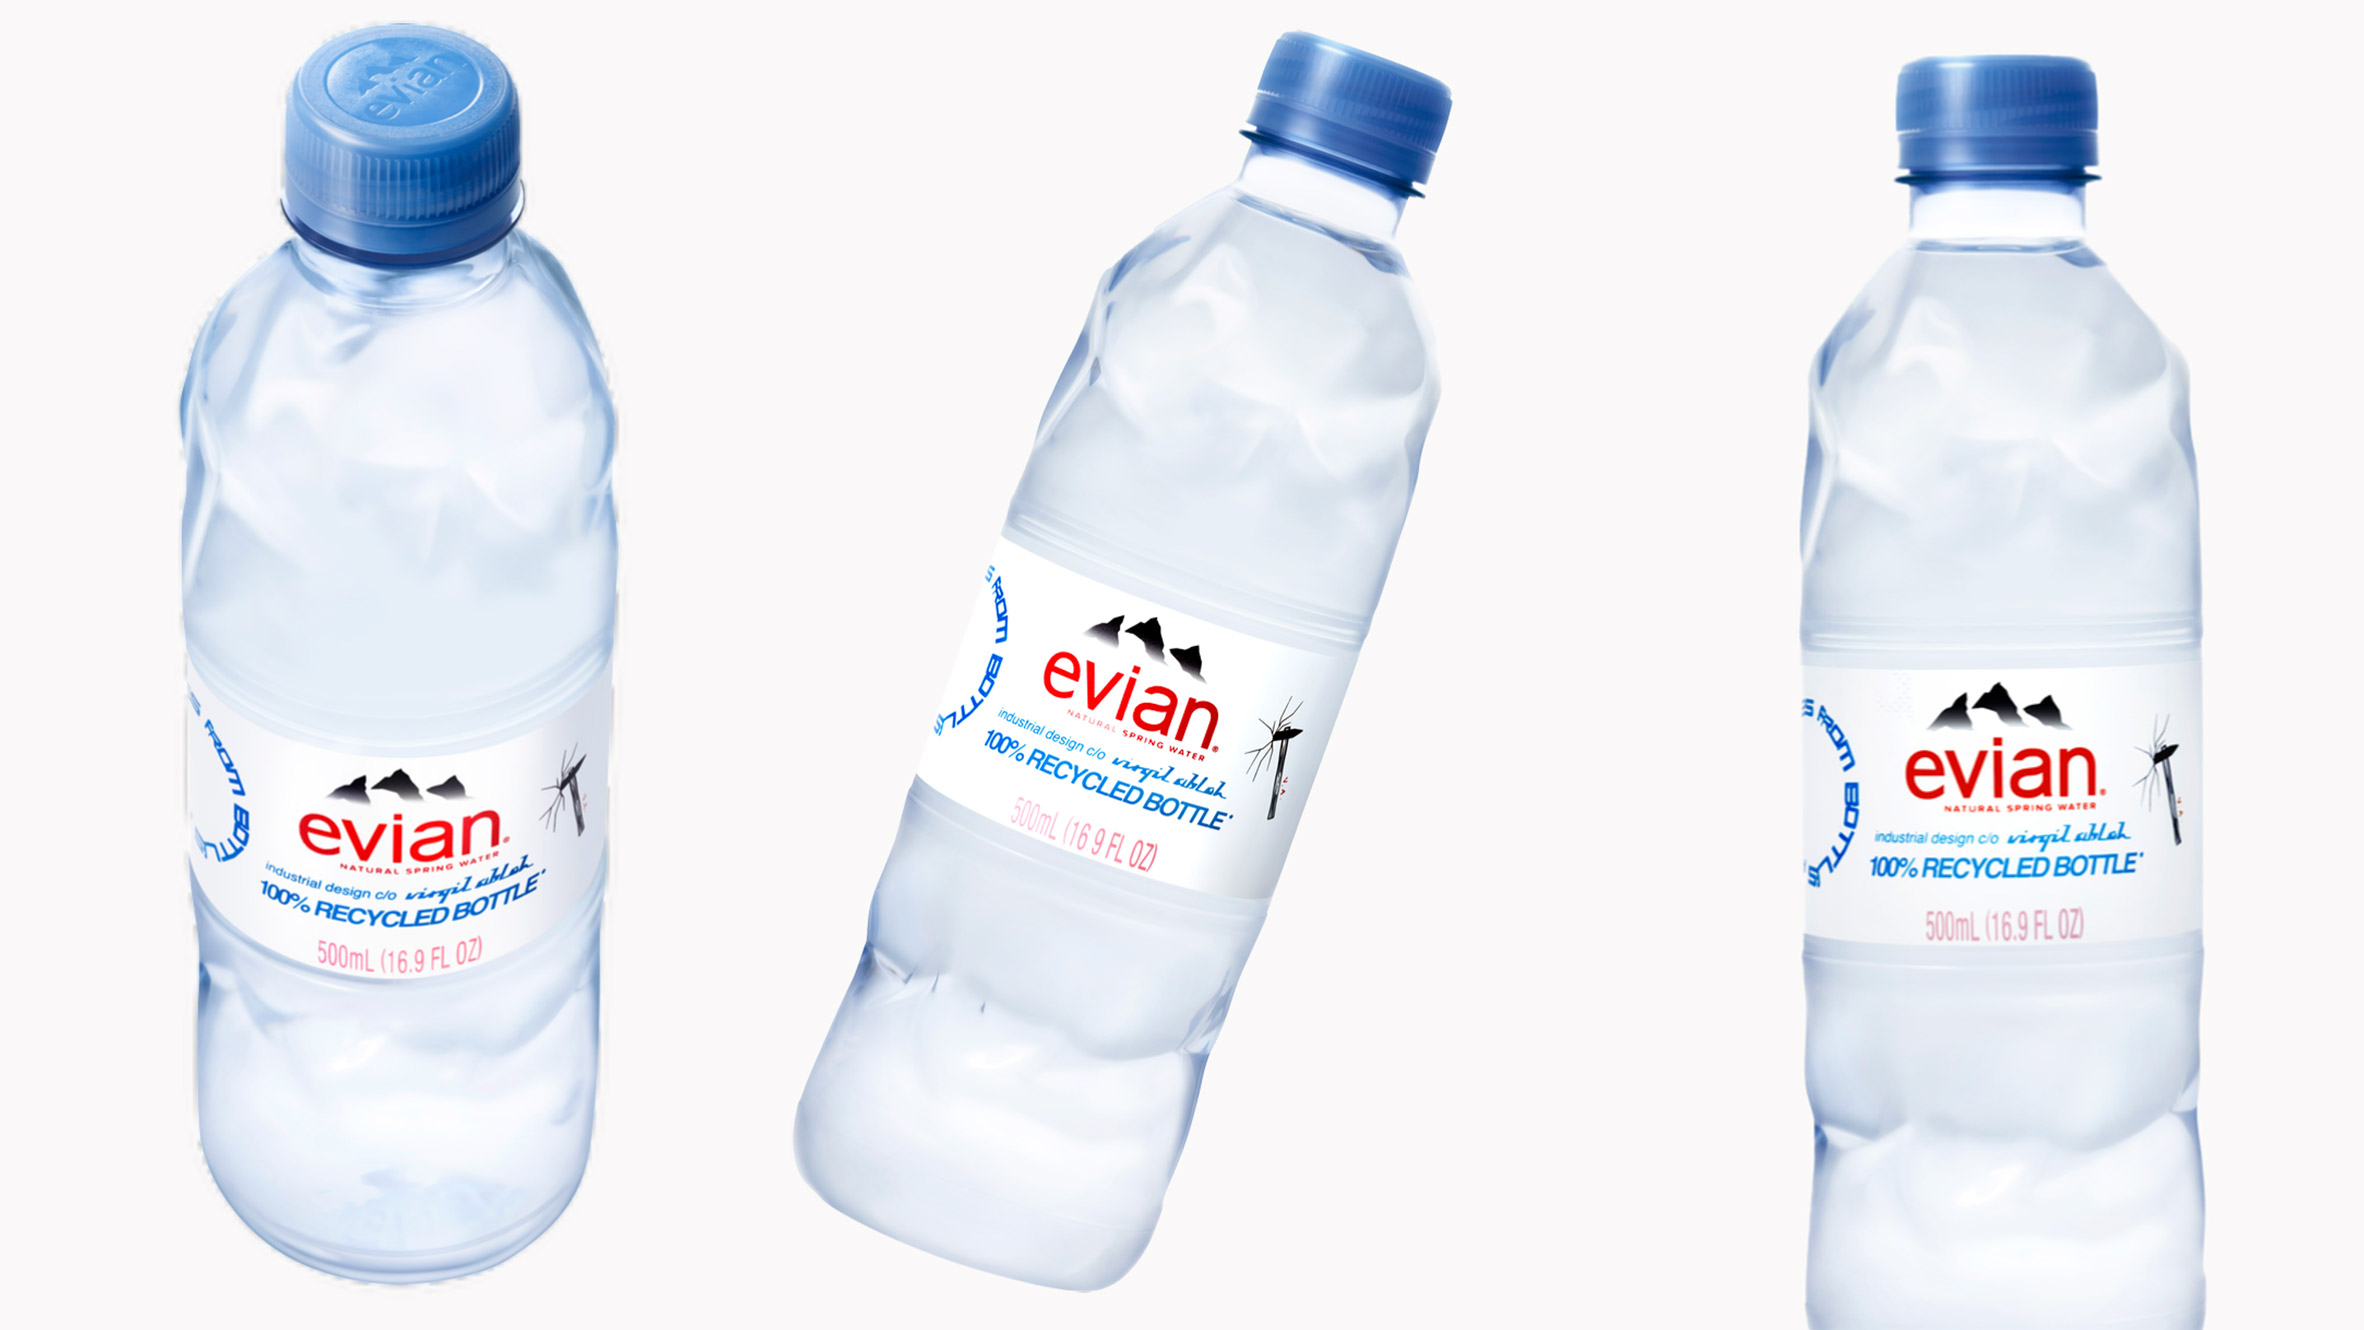 Virgil Abloh is working on a new project with Evian